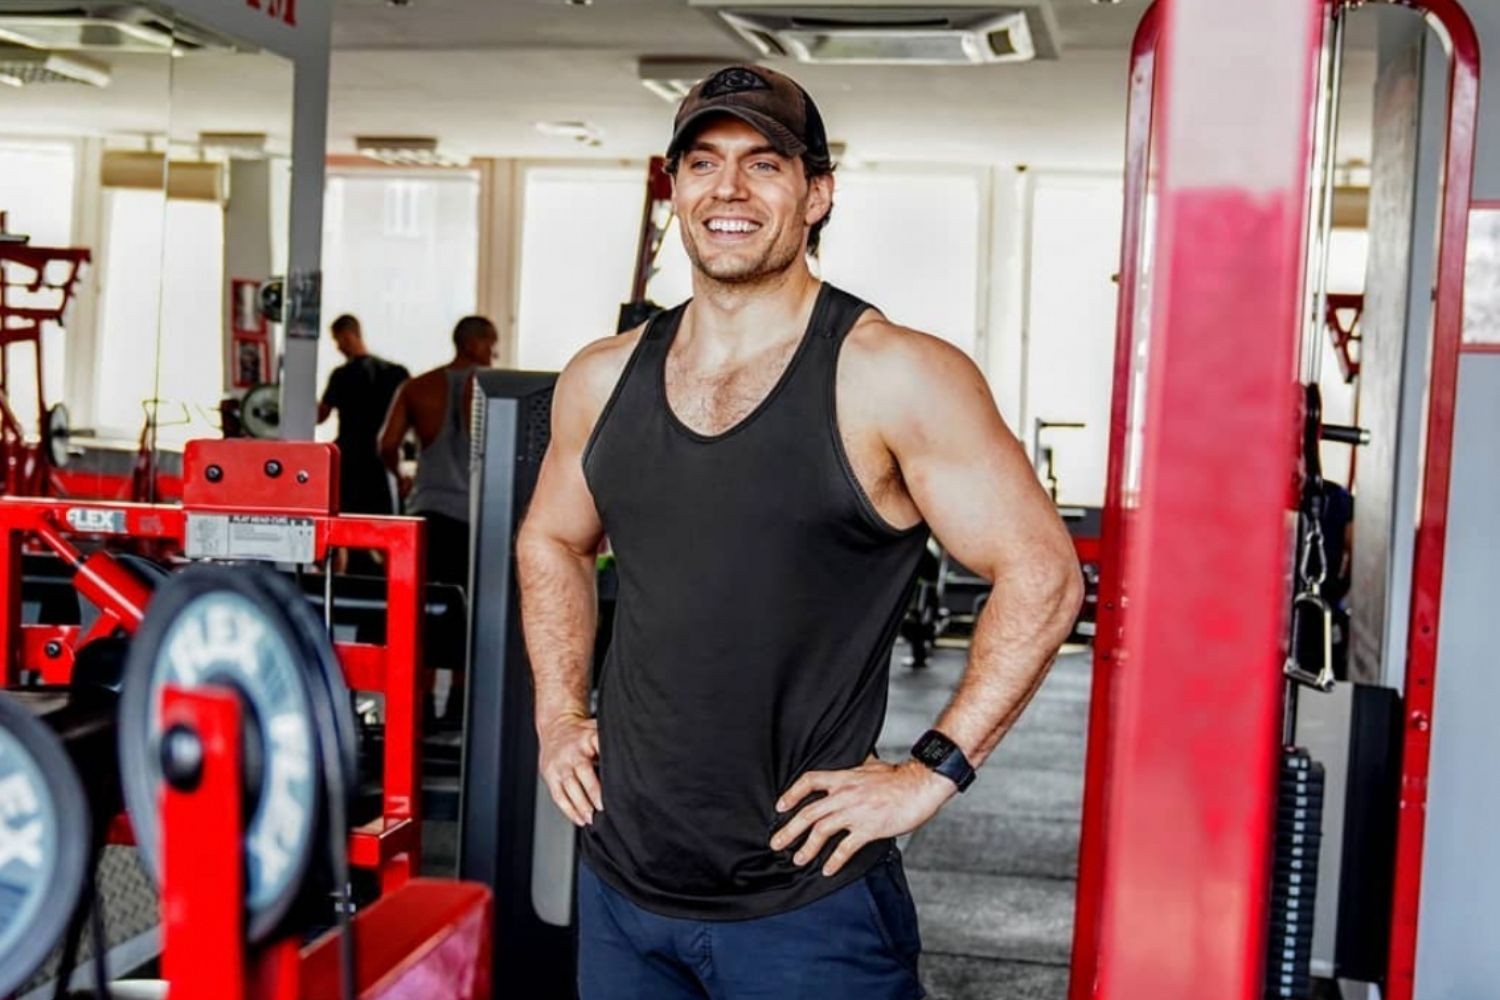 Cavill at the gym